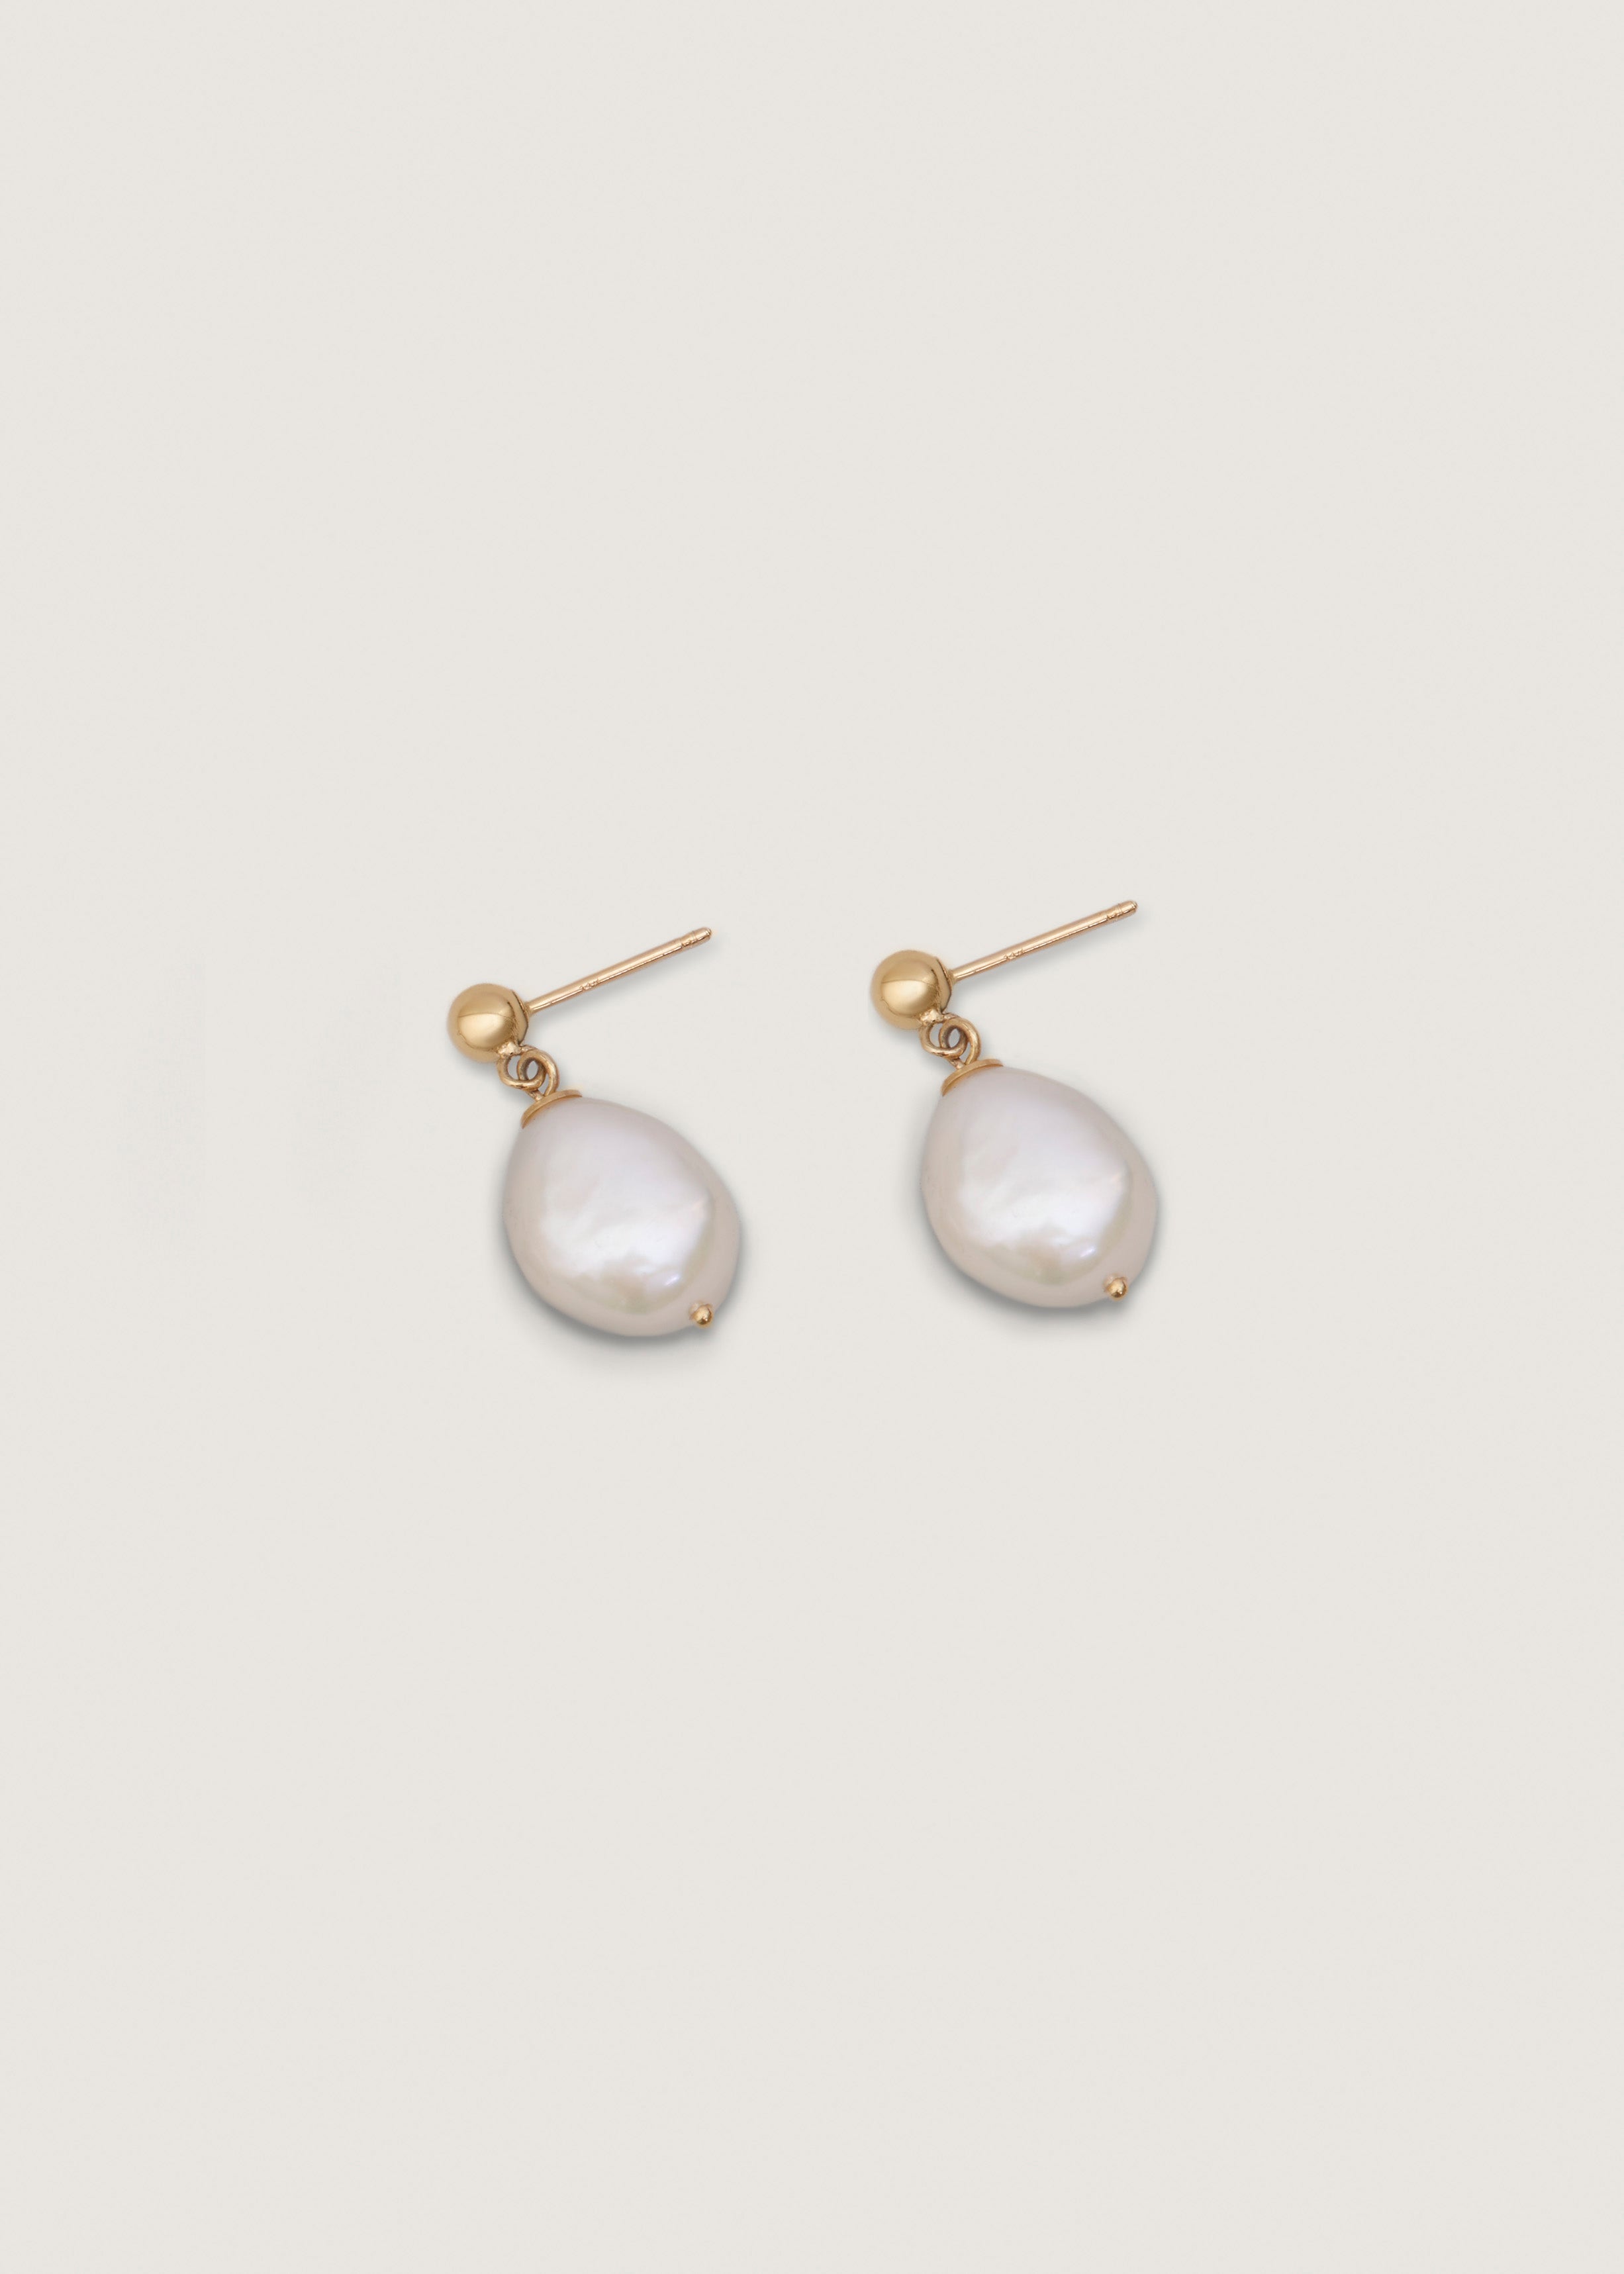 9ct Yellow Gold Freshwater Pearl & Diamond Drop Earrings | Buy Online |  Free Insured UK Delivery